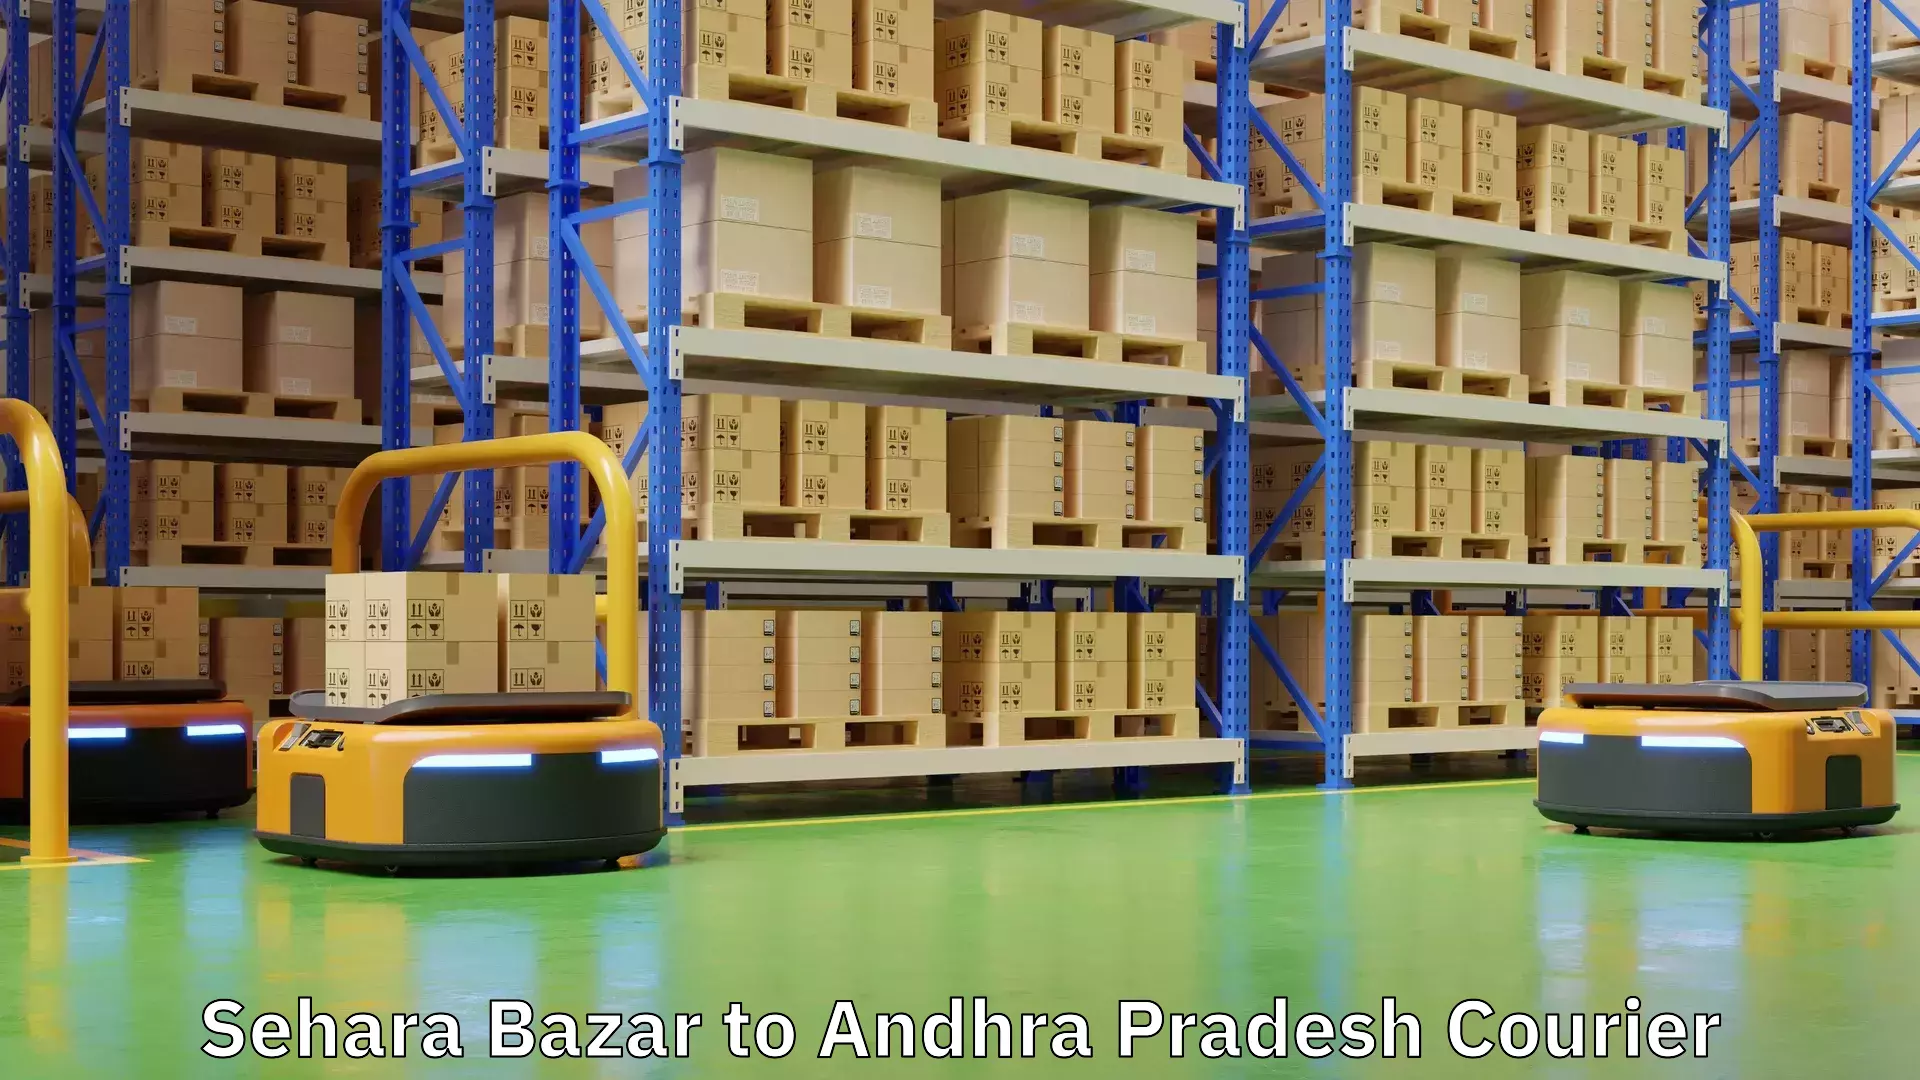 State-of-the-art courier technology Sehara Bazar to Andhra Pradesh